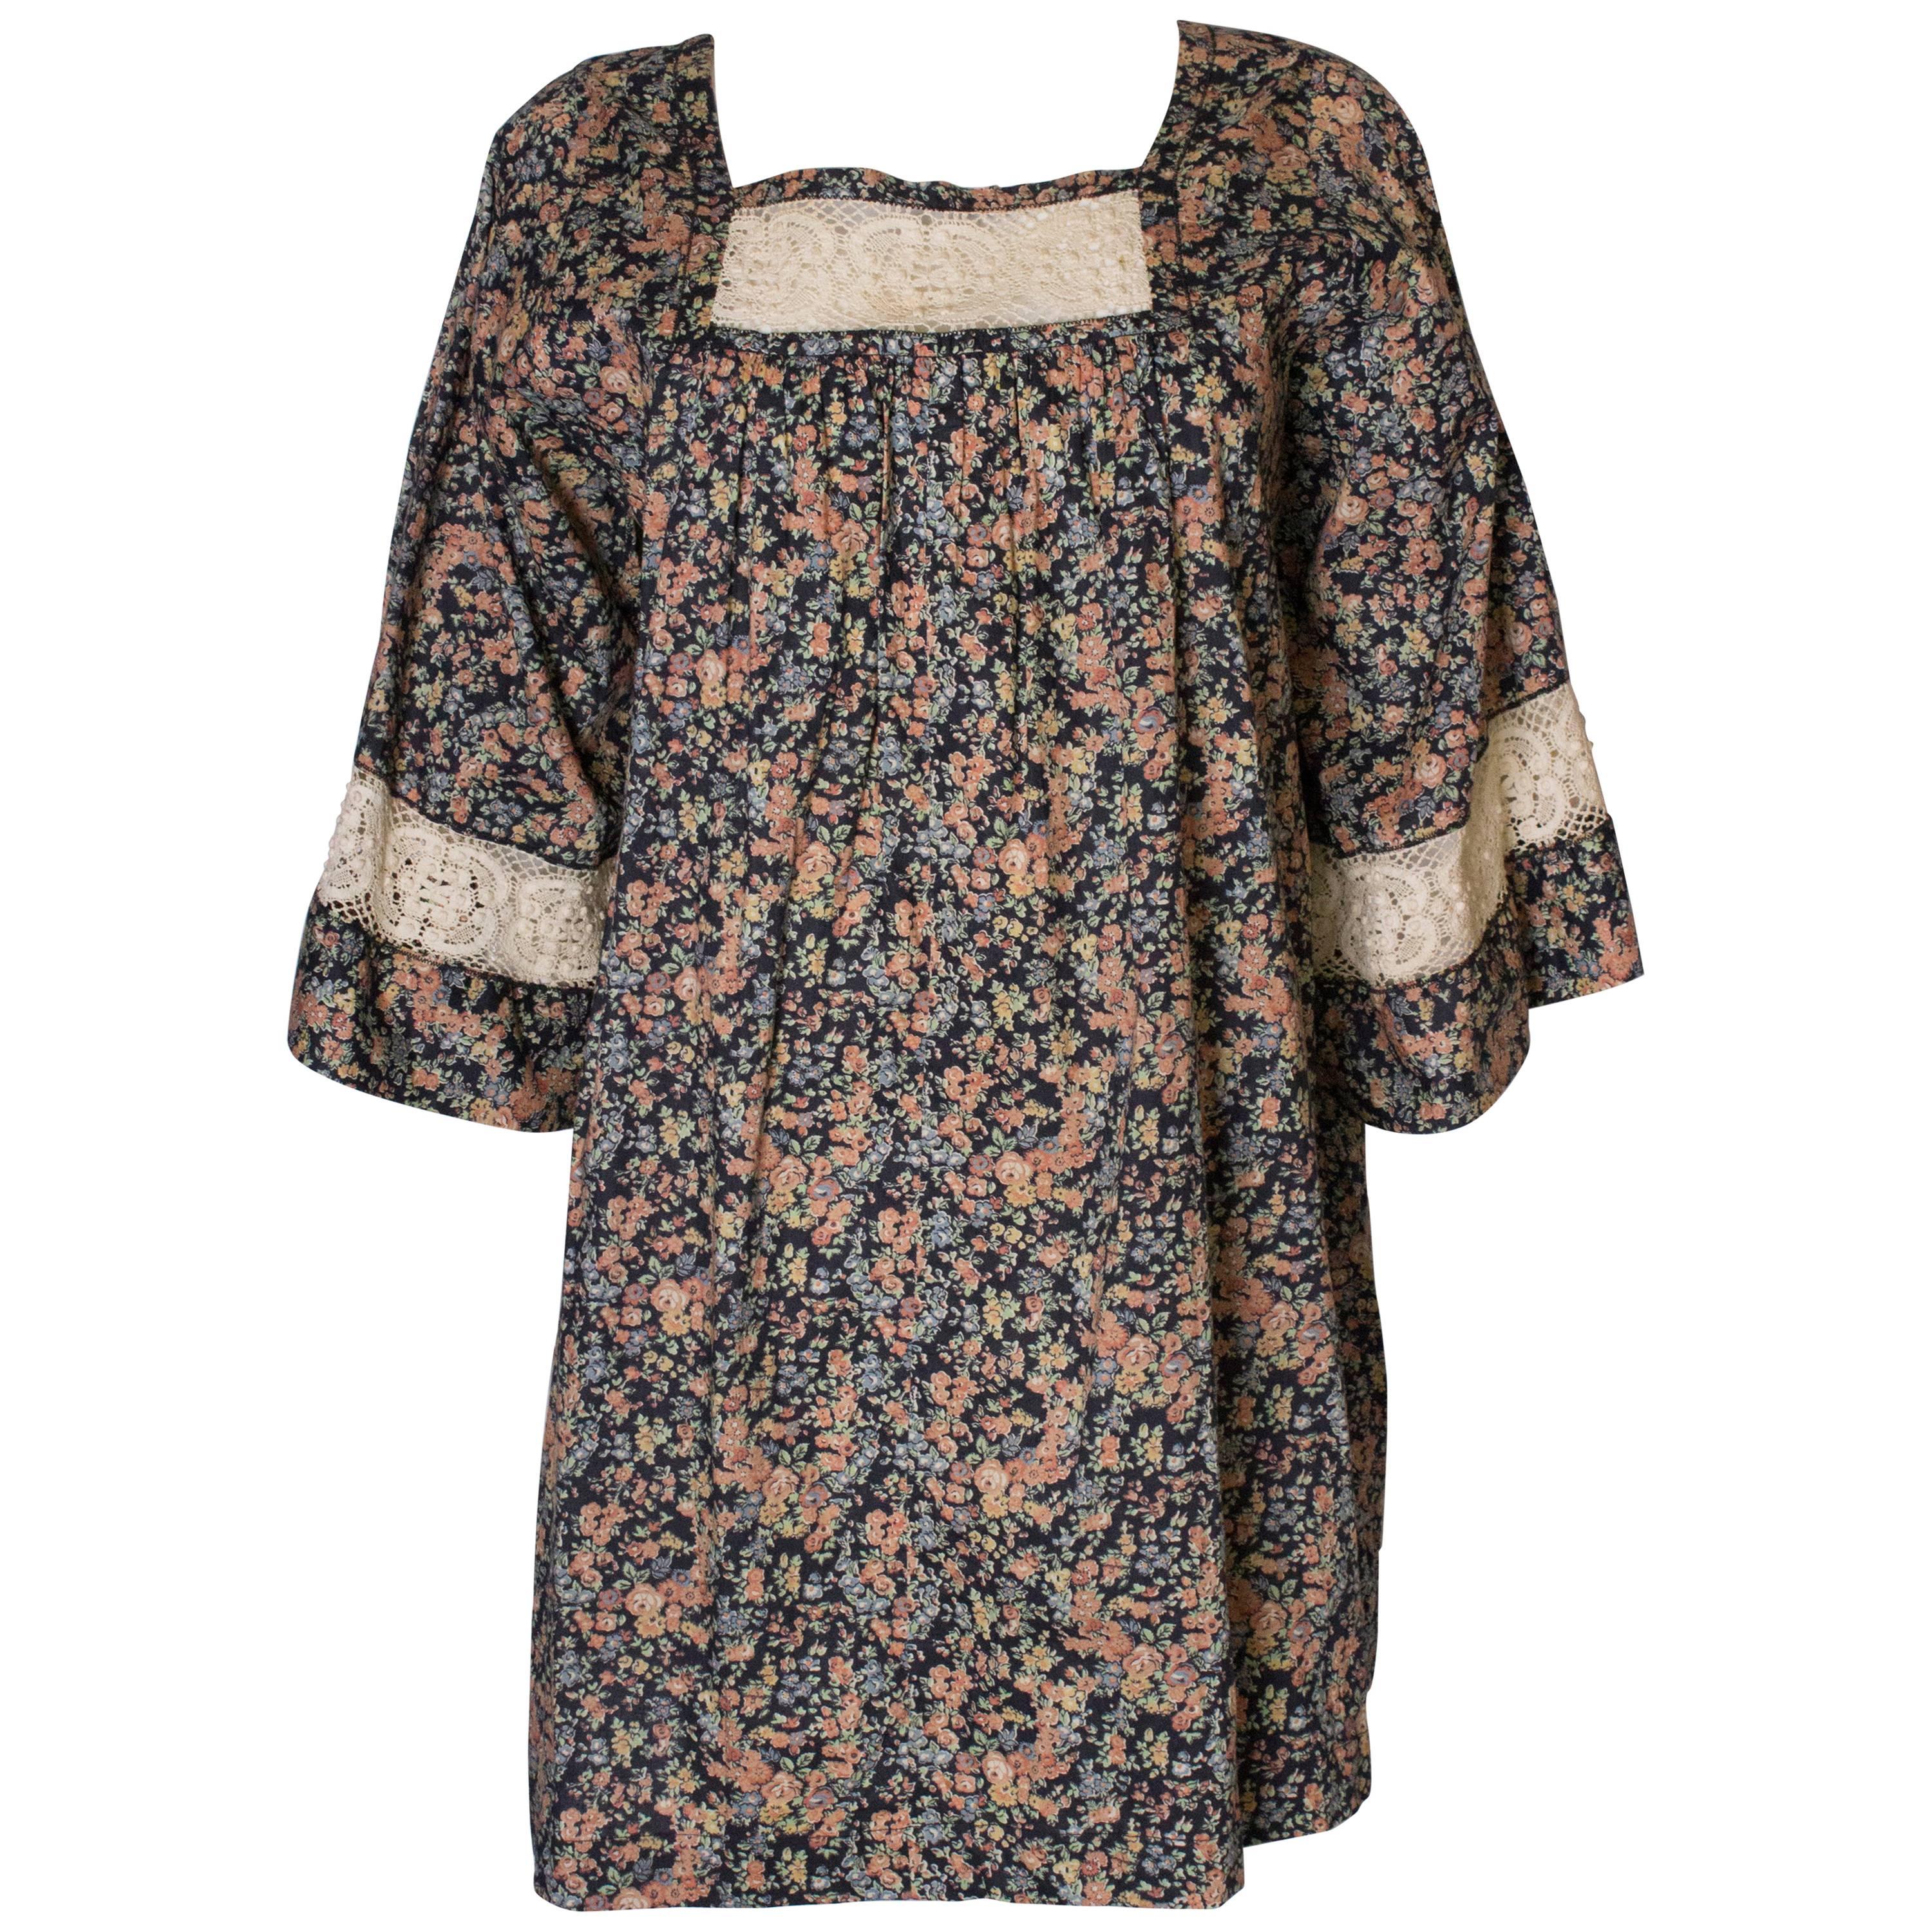 A Vintage 1970s floral print cotton smock  top by Sara Ferni for Liberty